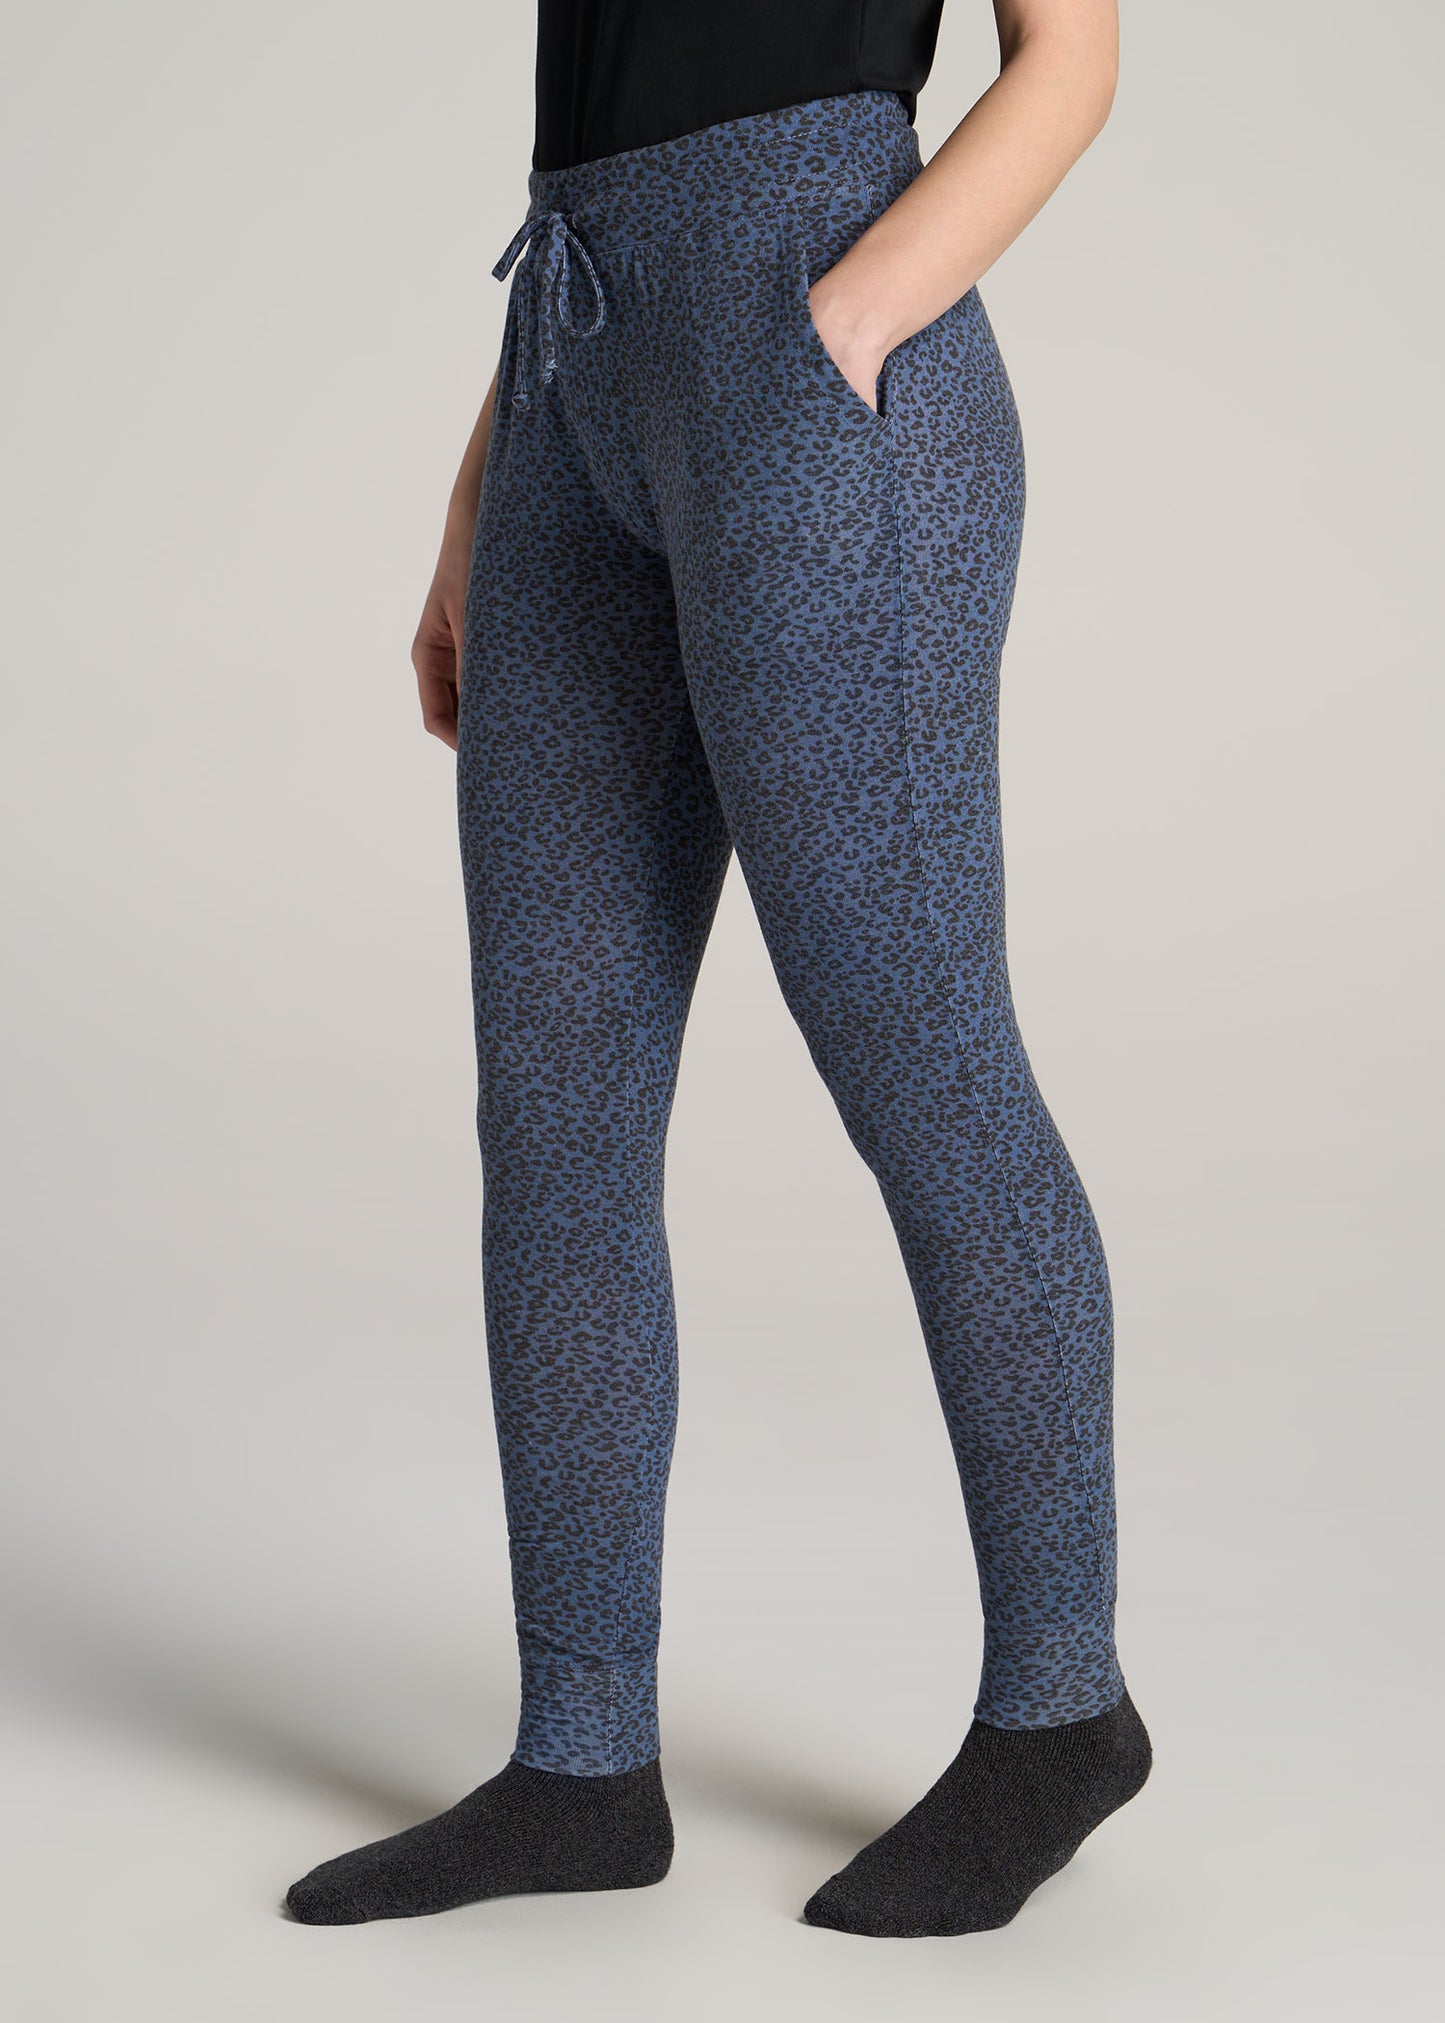 A tall woman wearing American Tall's Cozy Lounge Joggers for Tall Women in the color Navy Leopard Print.